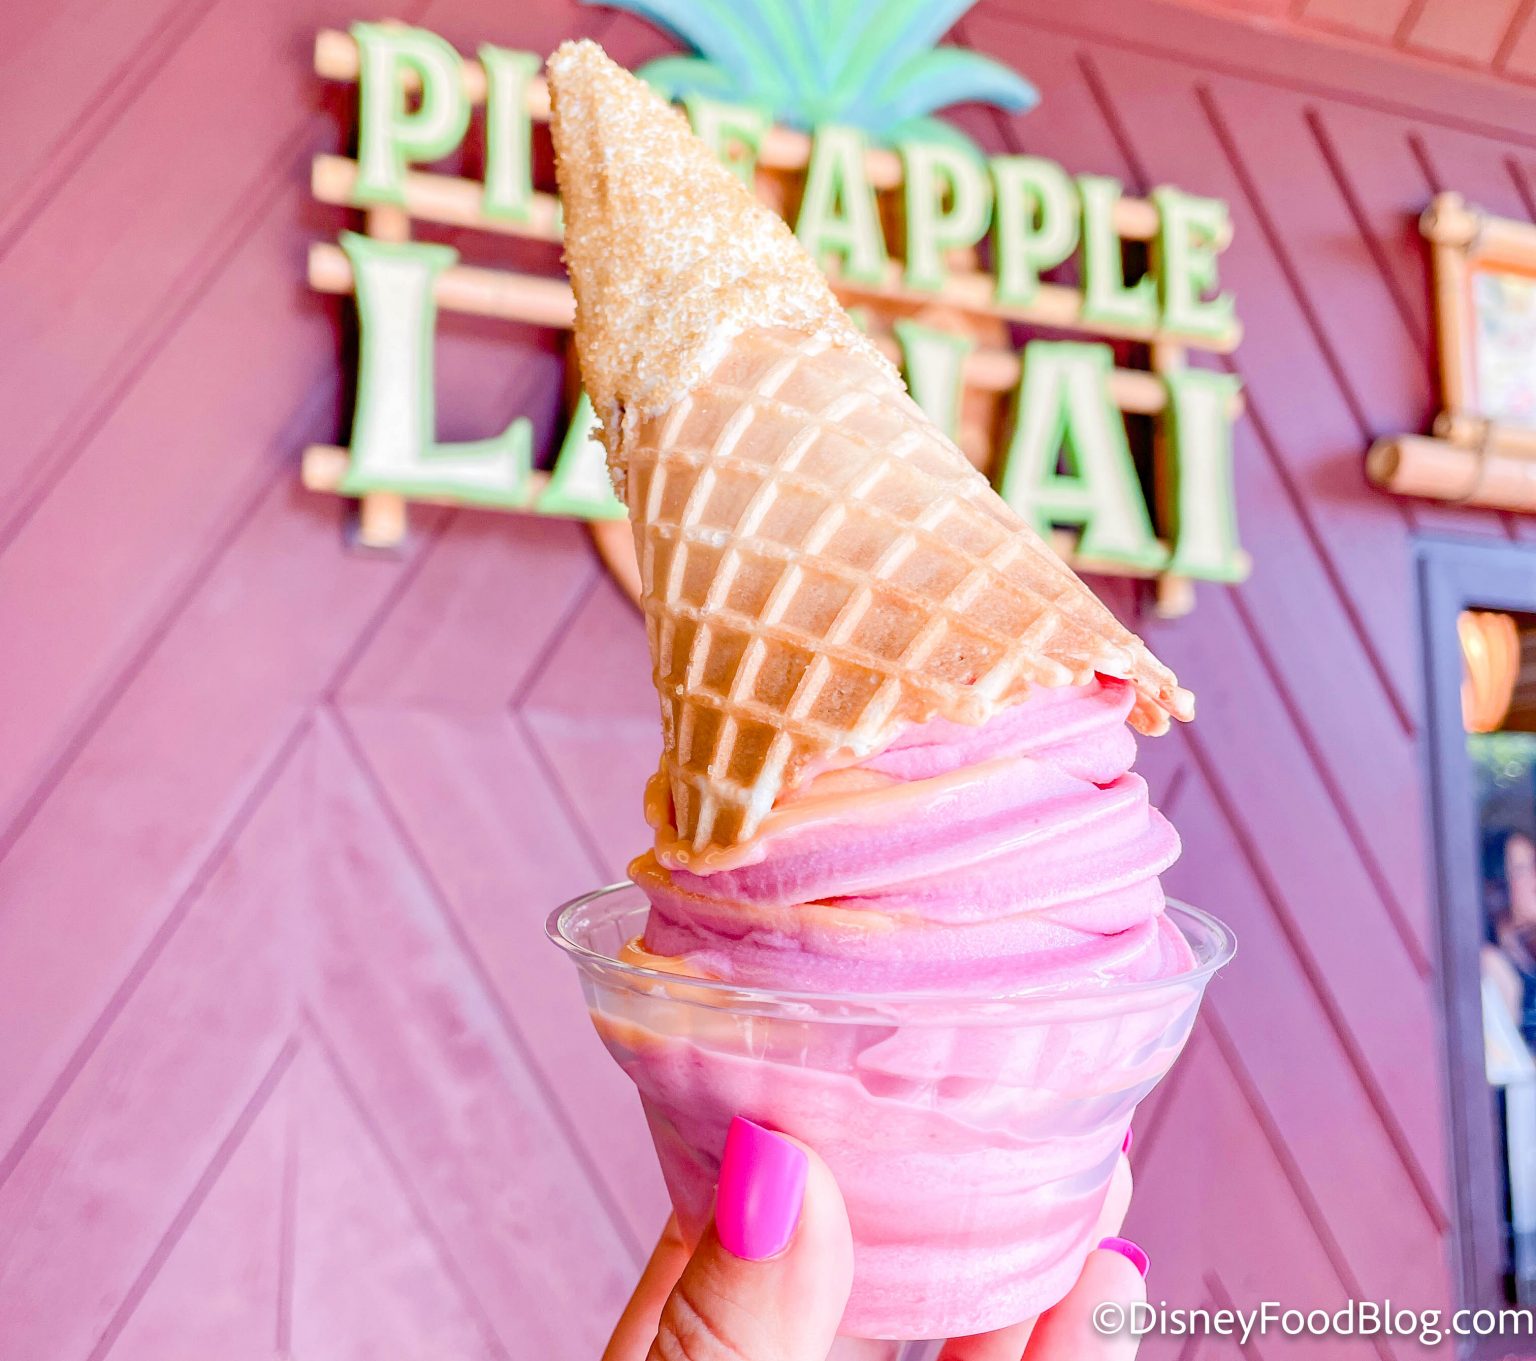 PHOTOS: There's a New MOANA-Themed Dole Whip Cone in Disney World ...